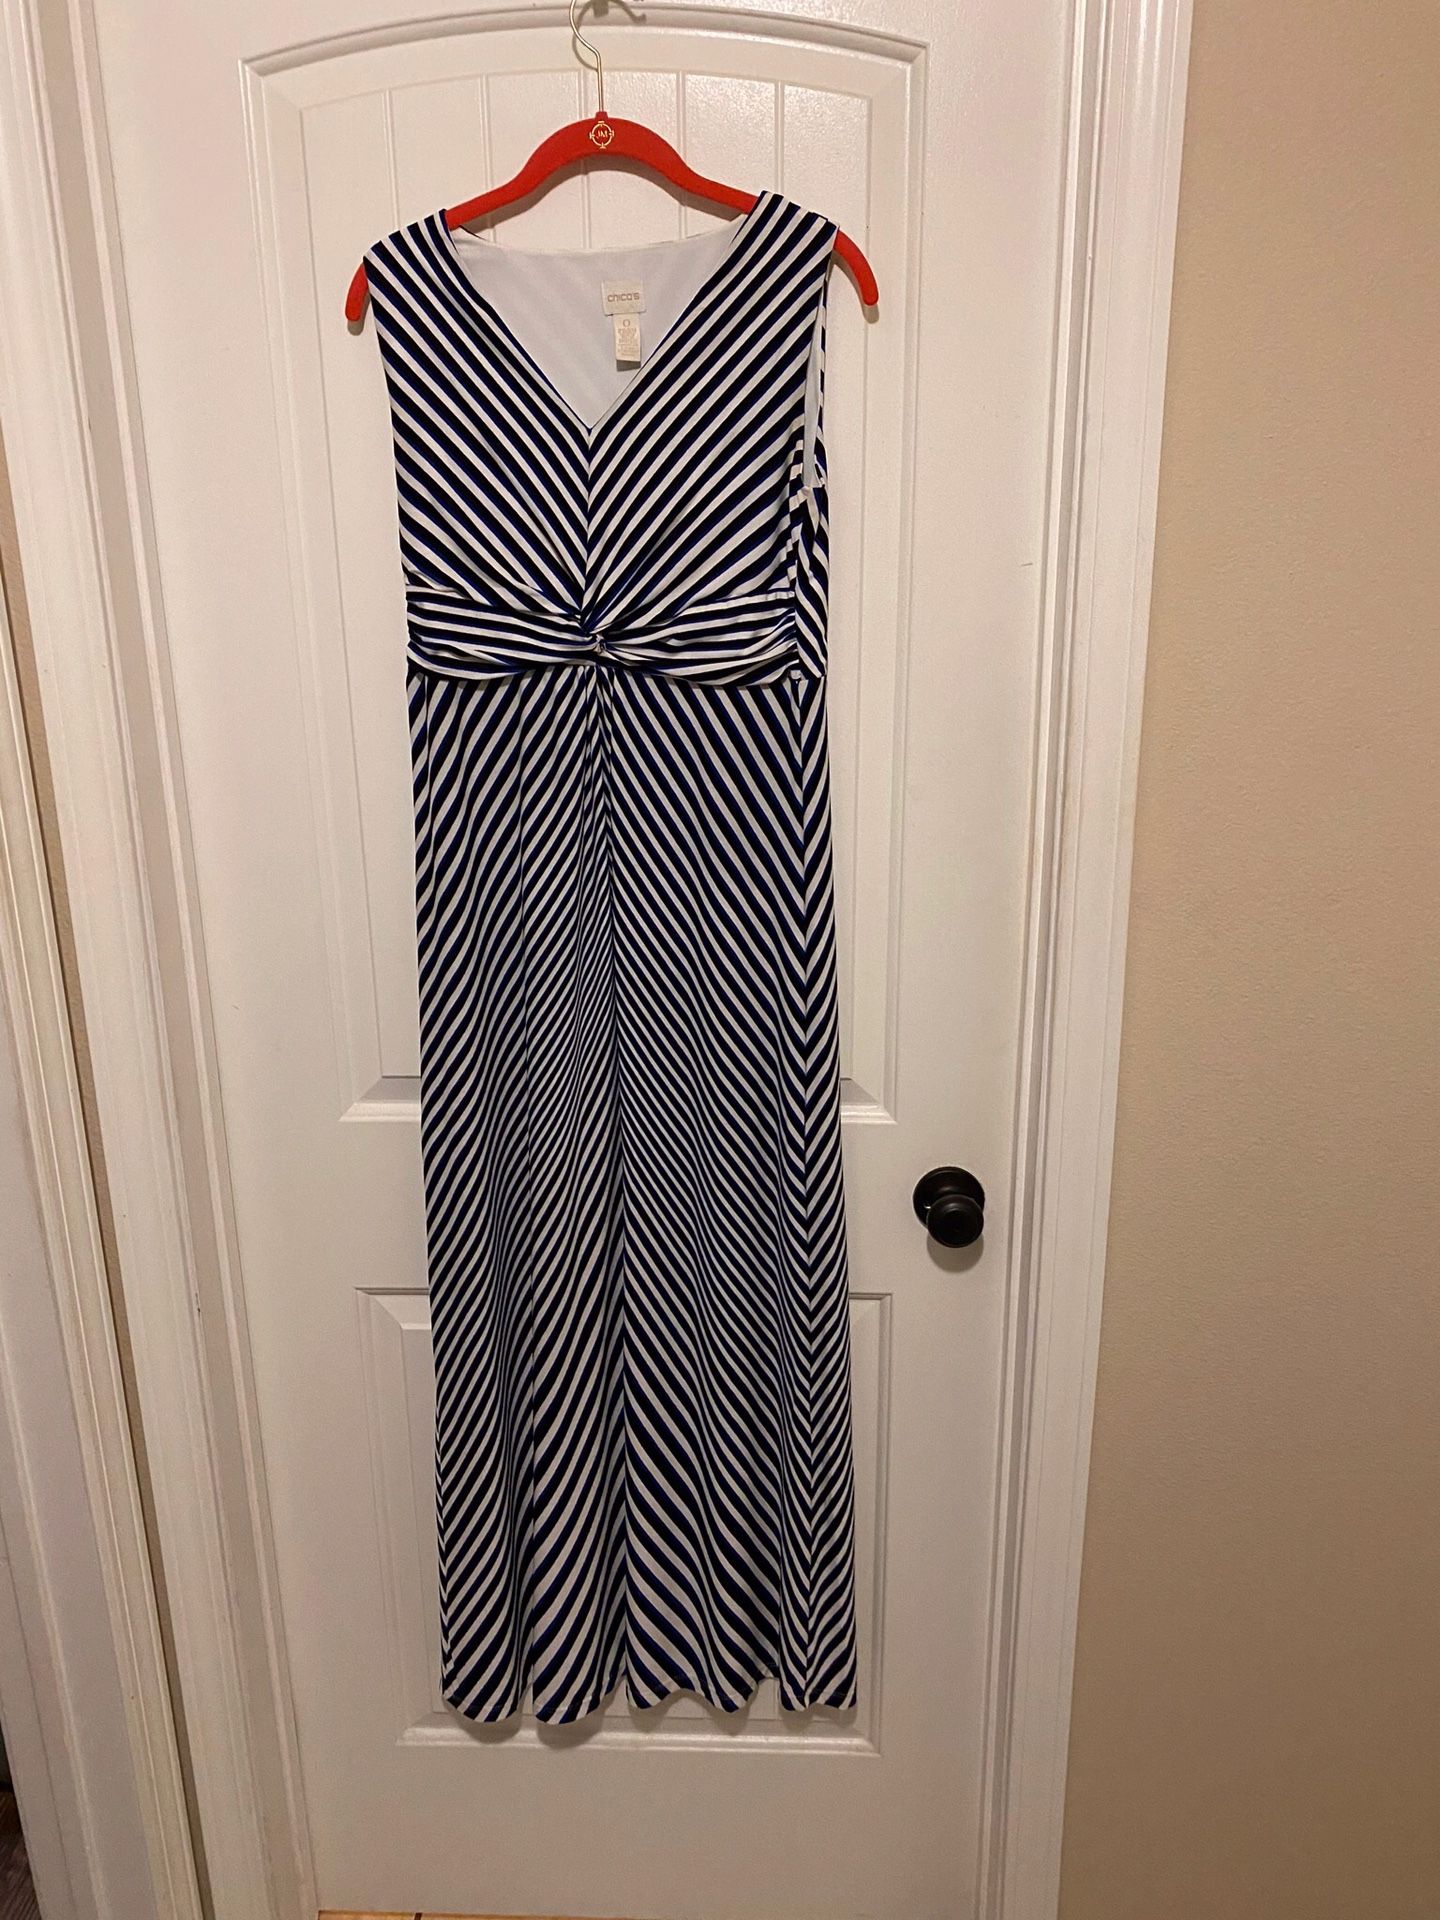 Chico’s Maxi dress. The size is more like a 4 or 6.